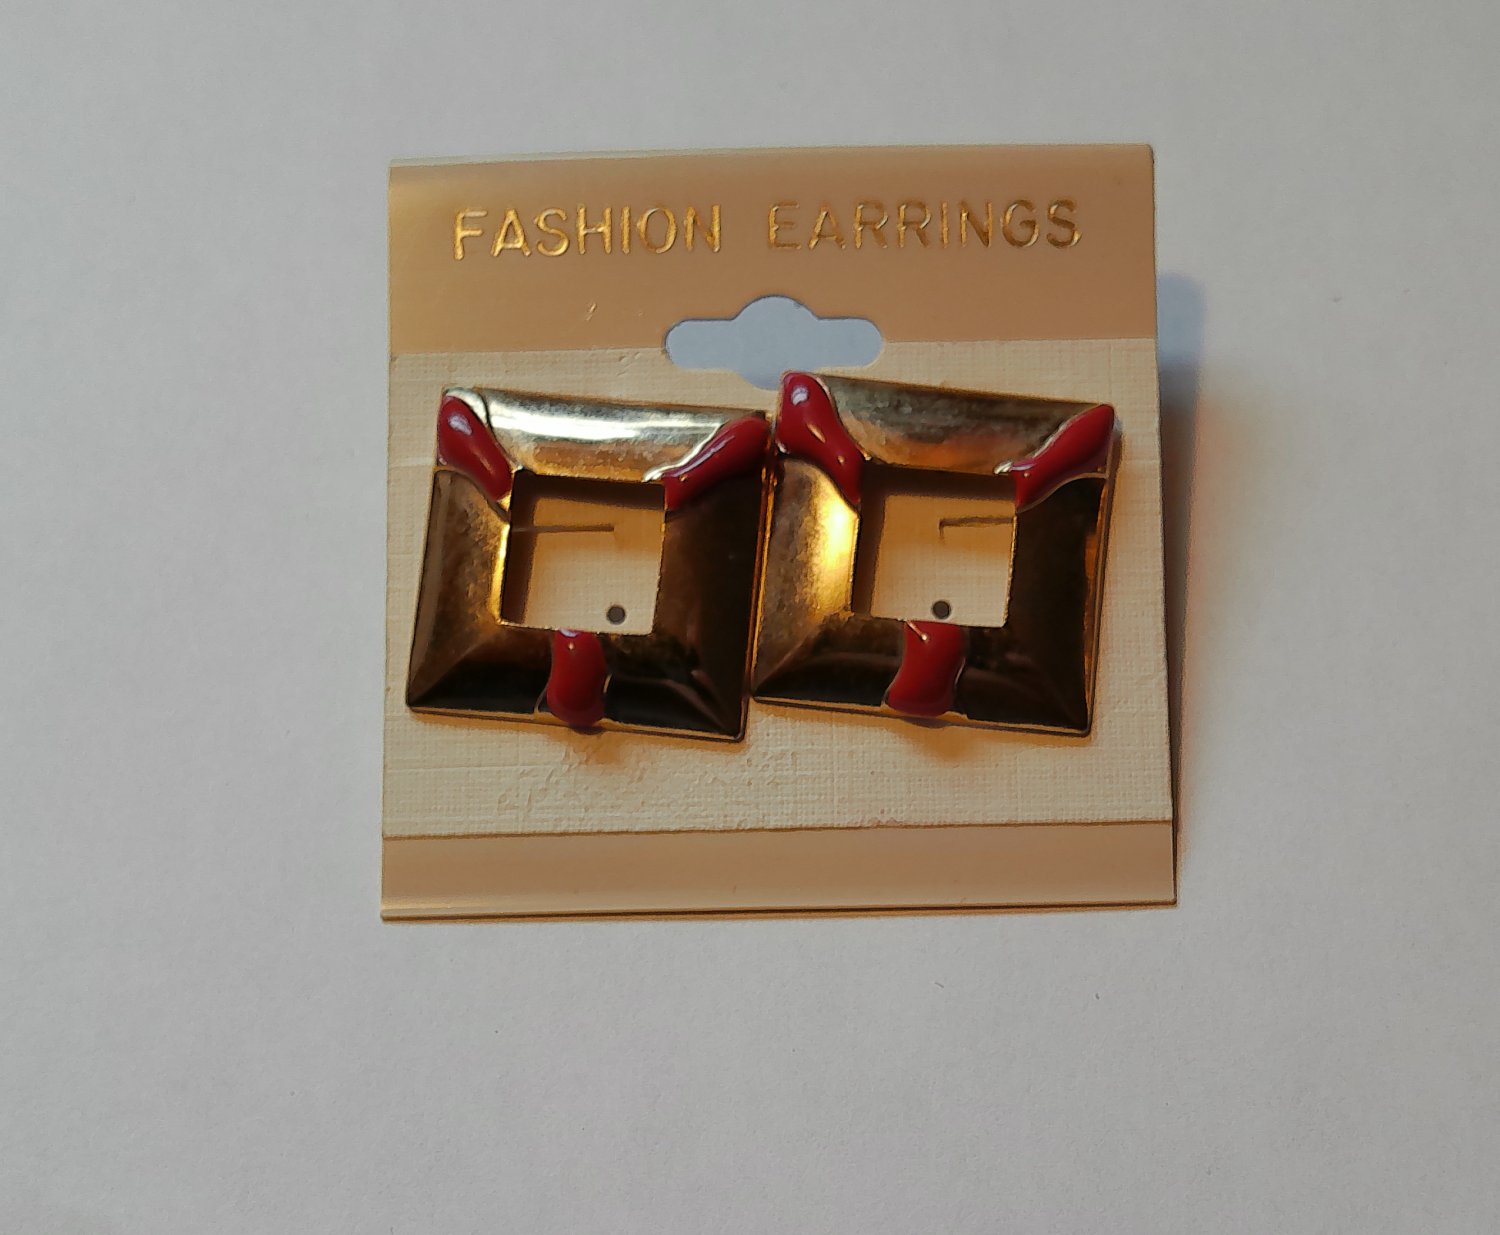 Square Gold Tone with Pink Lines Pierced Earrings